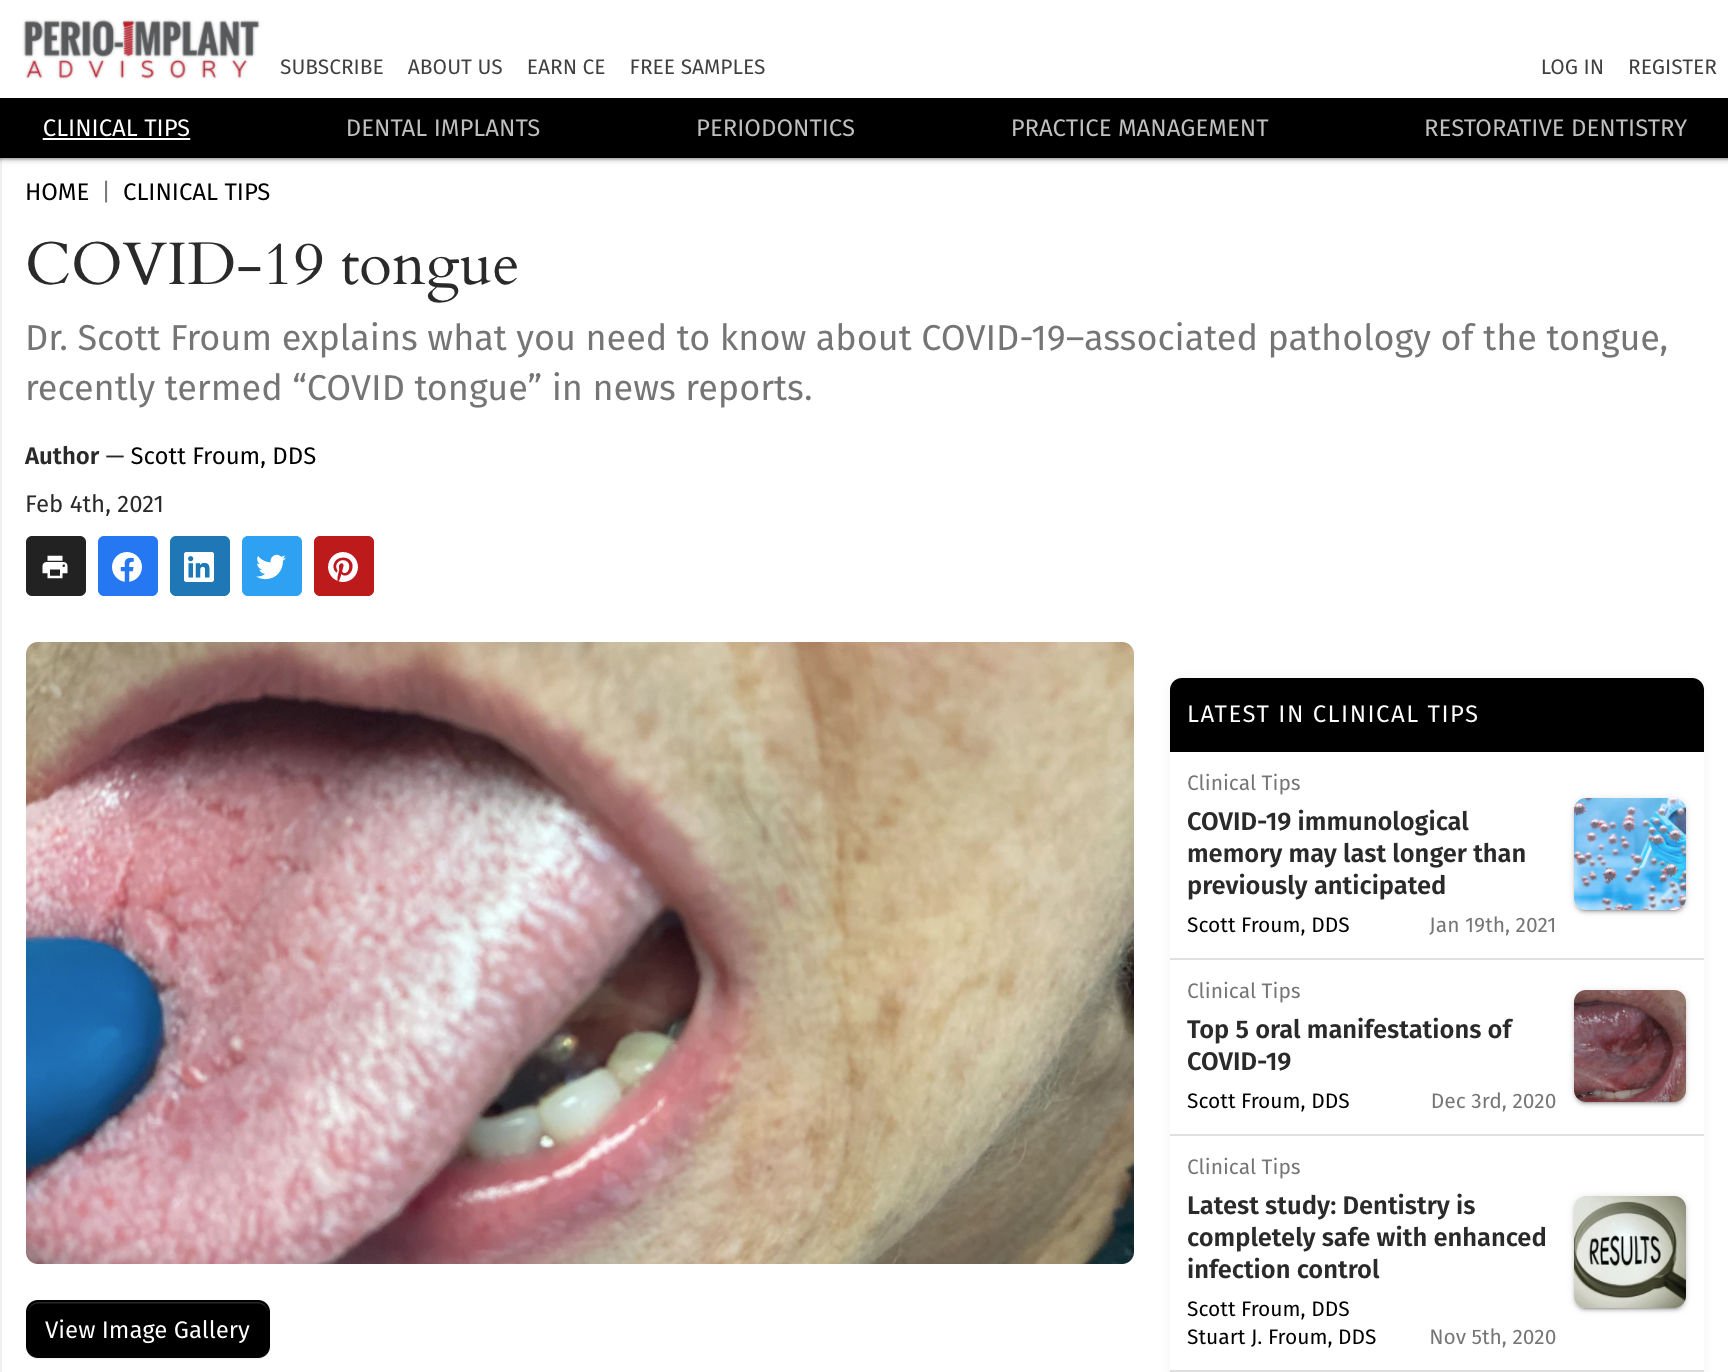 COVID-19 tongue, by Scott Froum, DDS Image